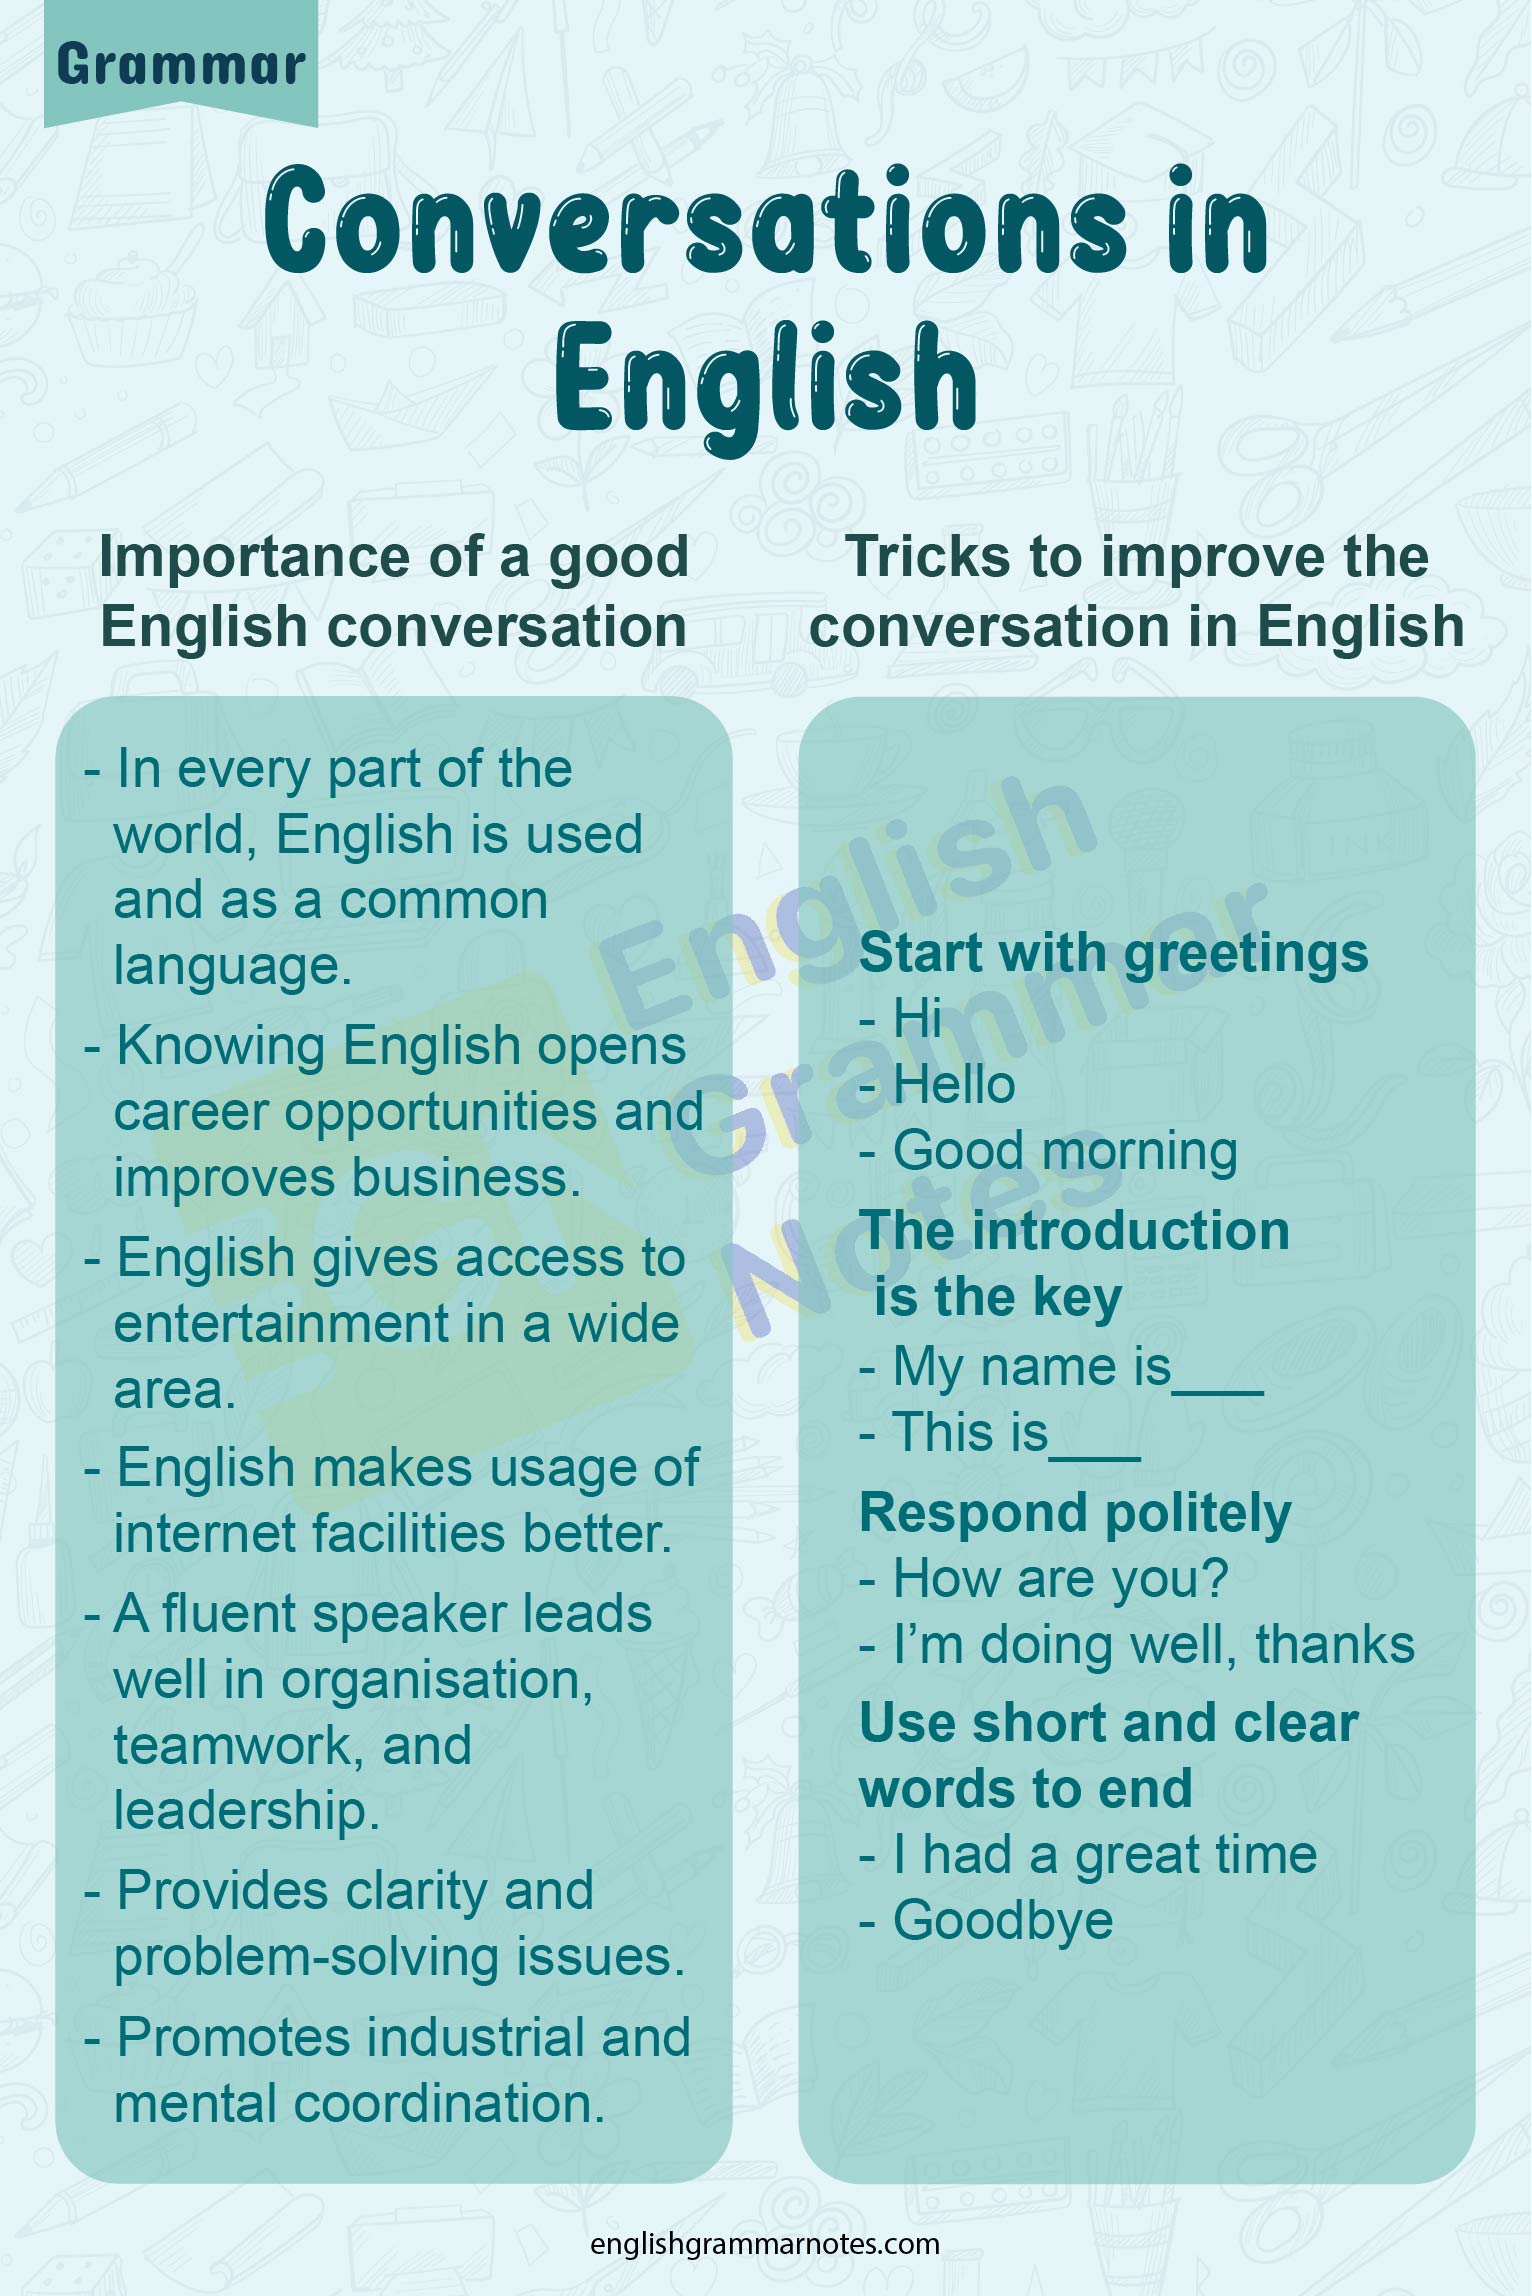 Useful Tips and Tools to Practice Conversations in English 1